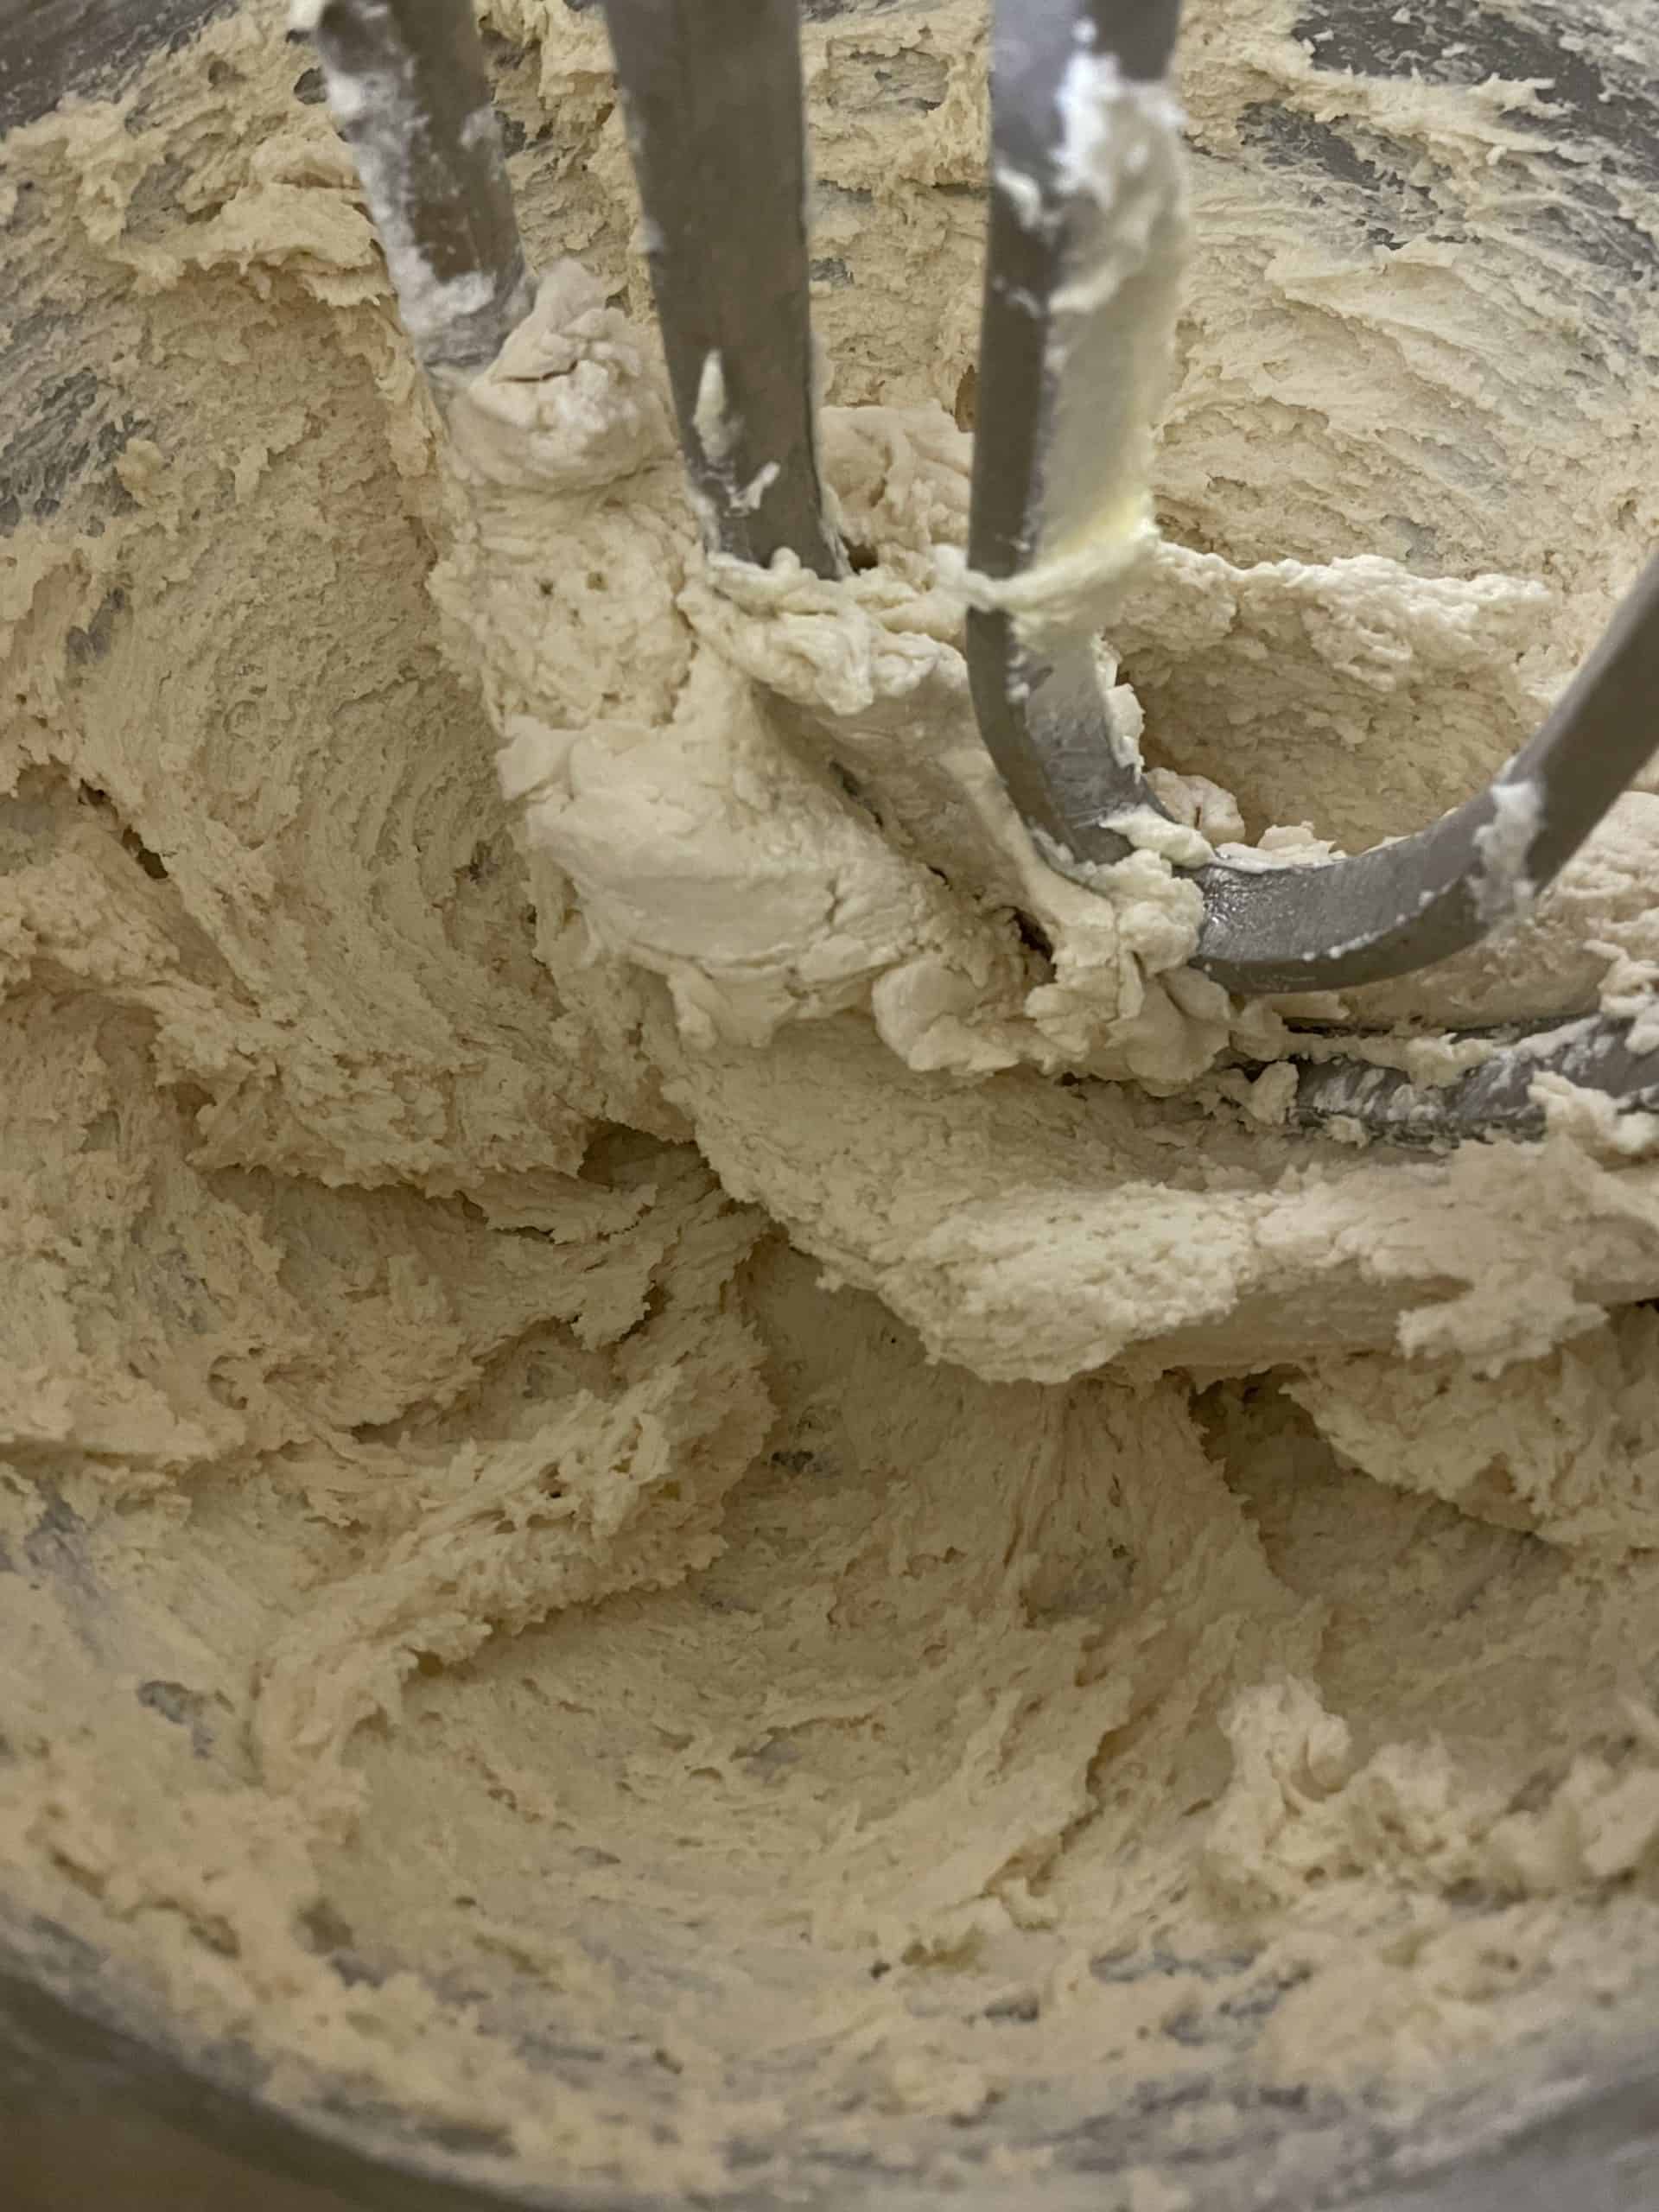 Creaming cookie dough ingredients together in a mixer.